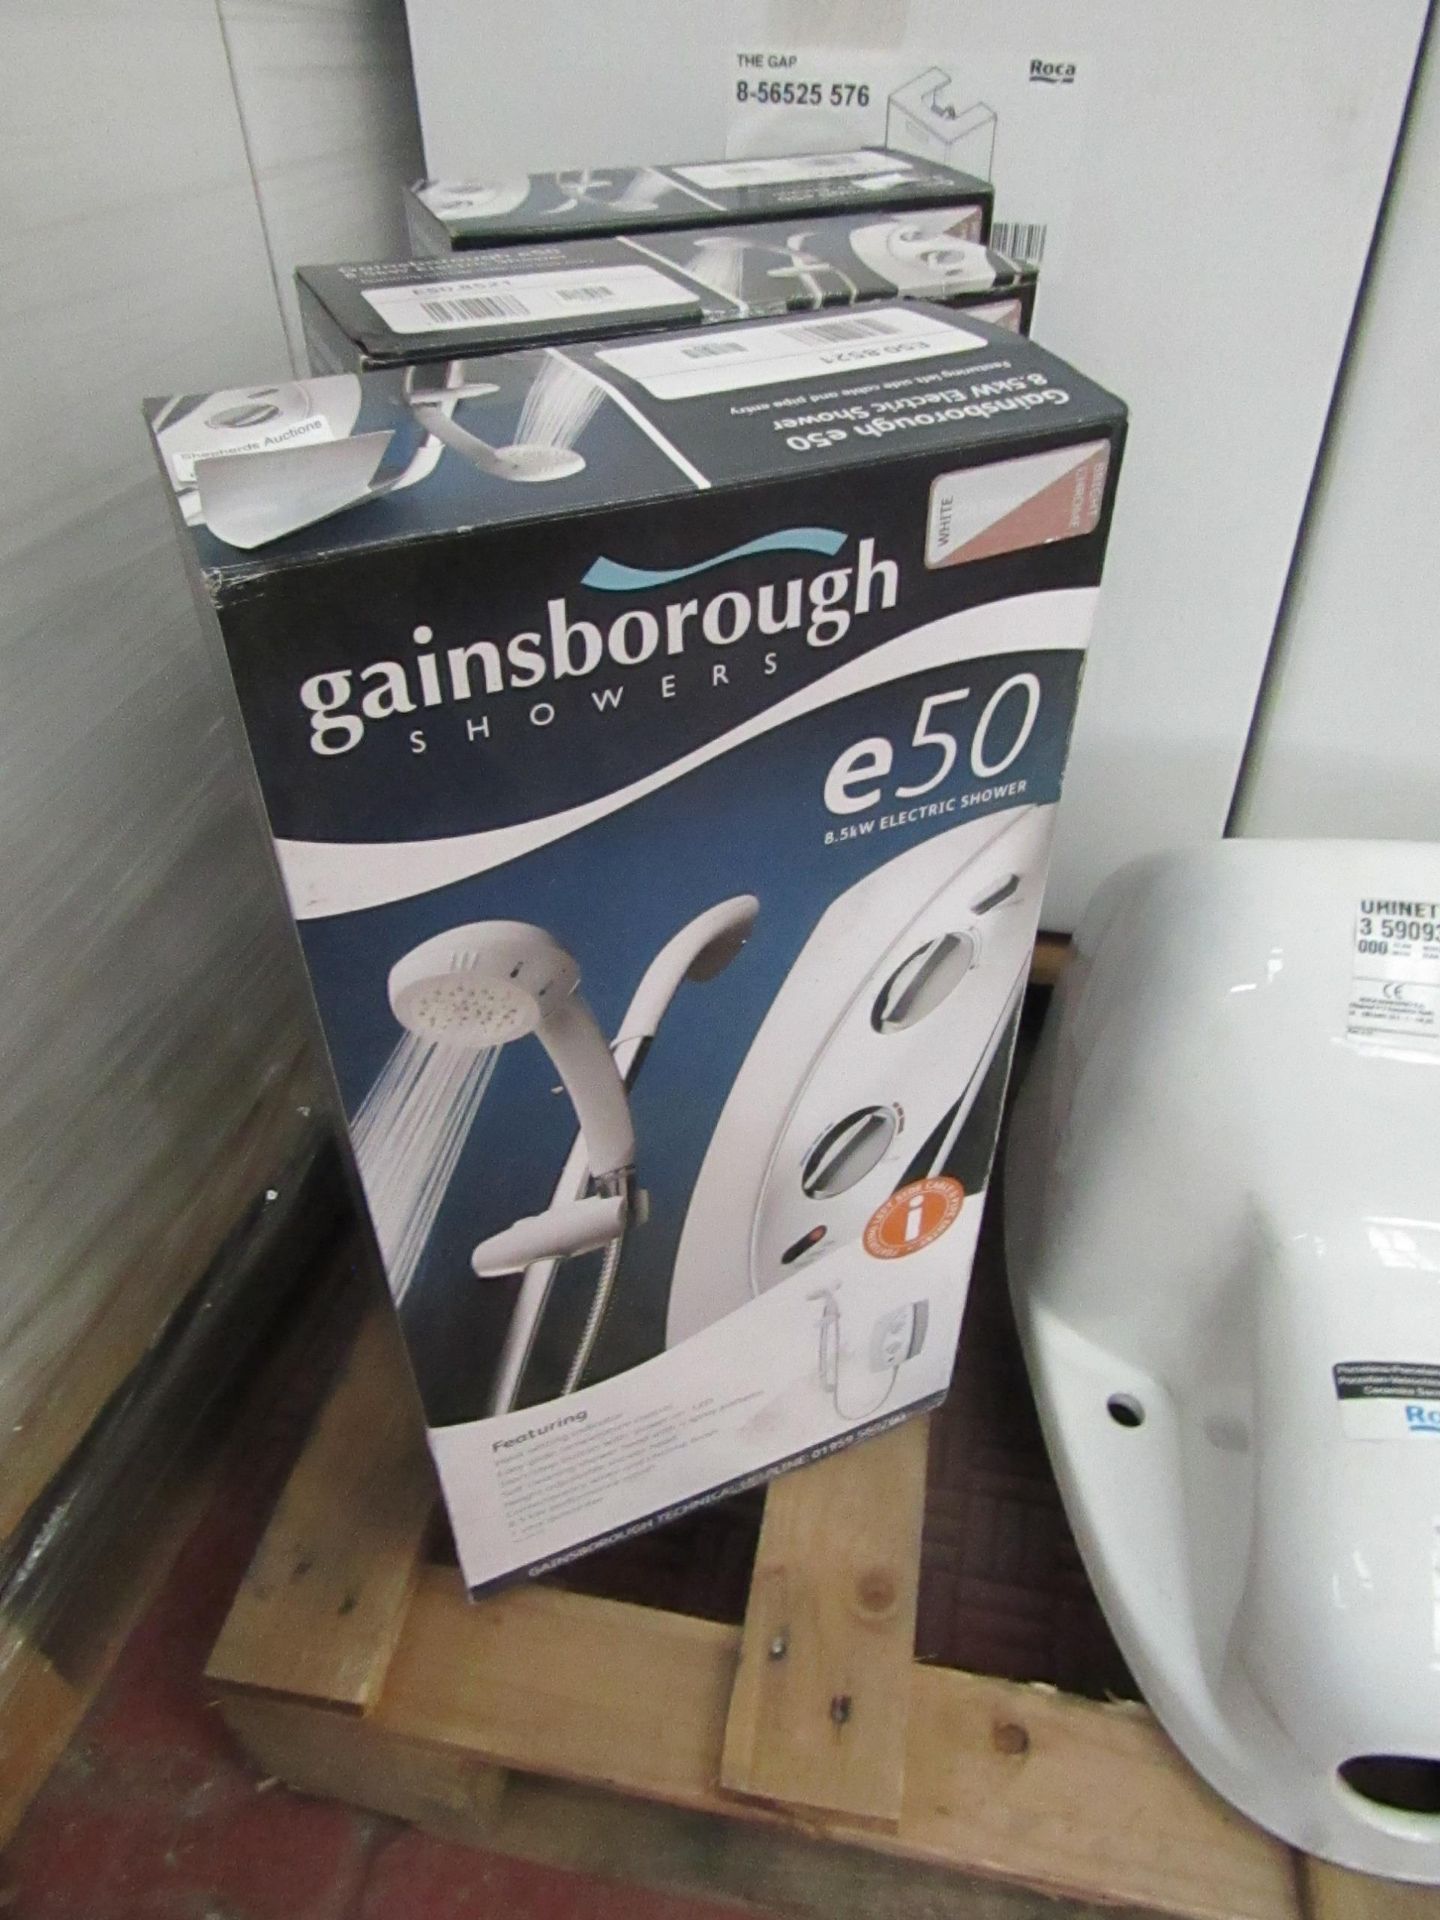 Gainsborough e50 8.5Kw electric shower, new and boxed.